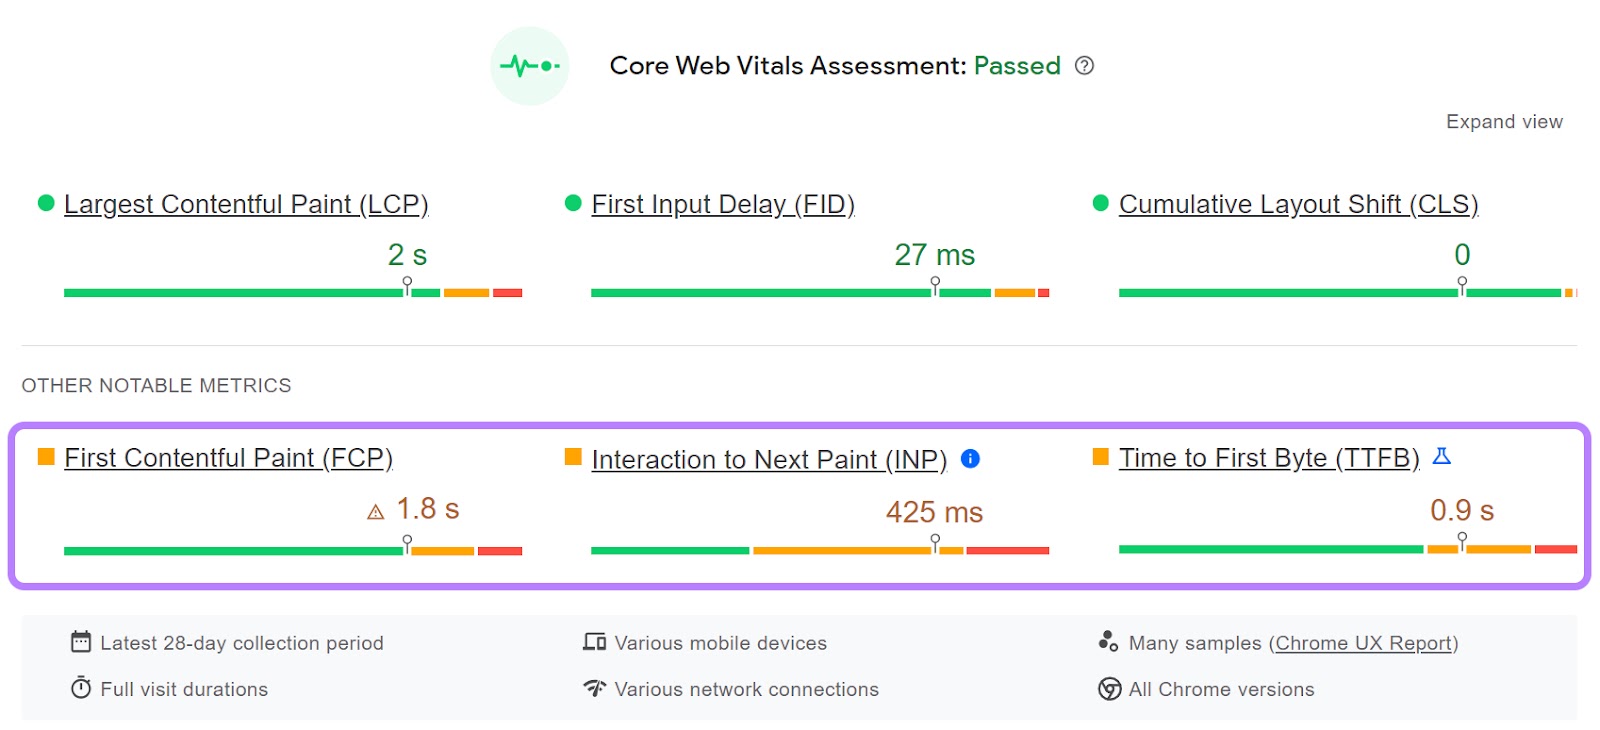 Google PageSpeed Insights' "Core Web Vitals Assessment" report